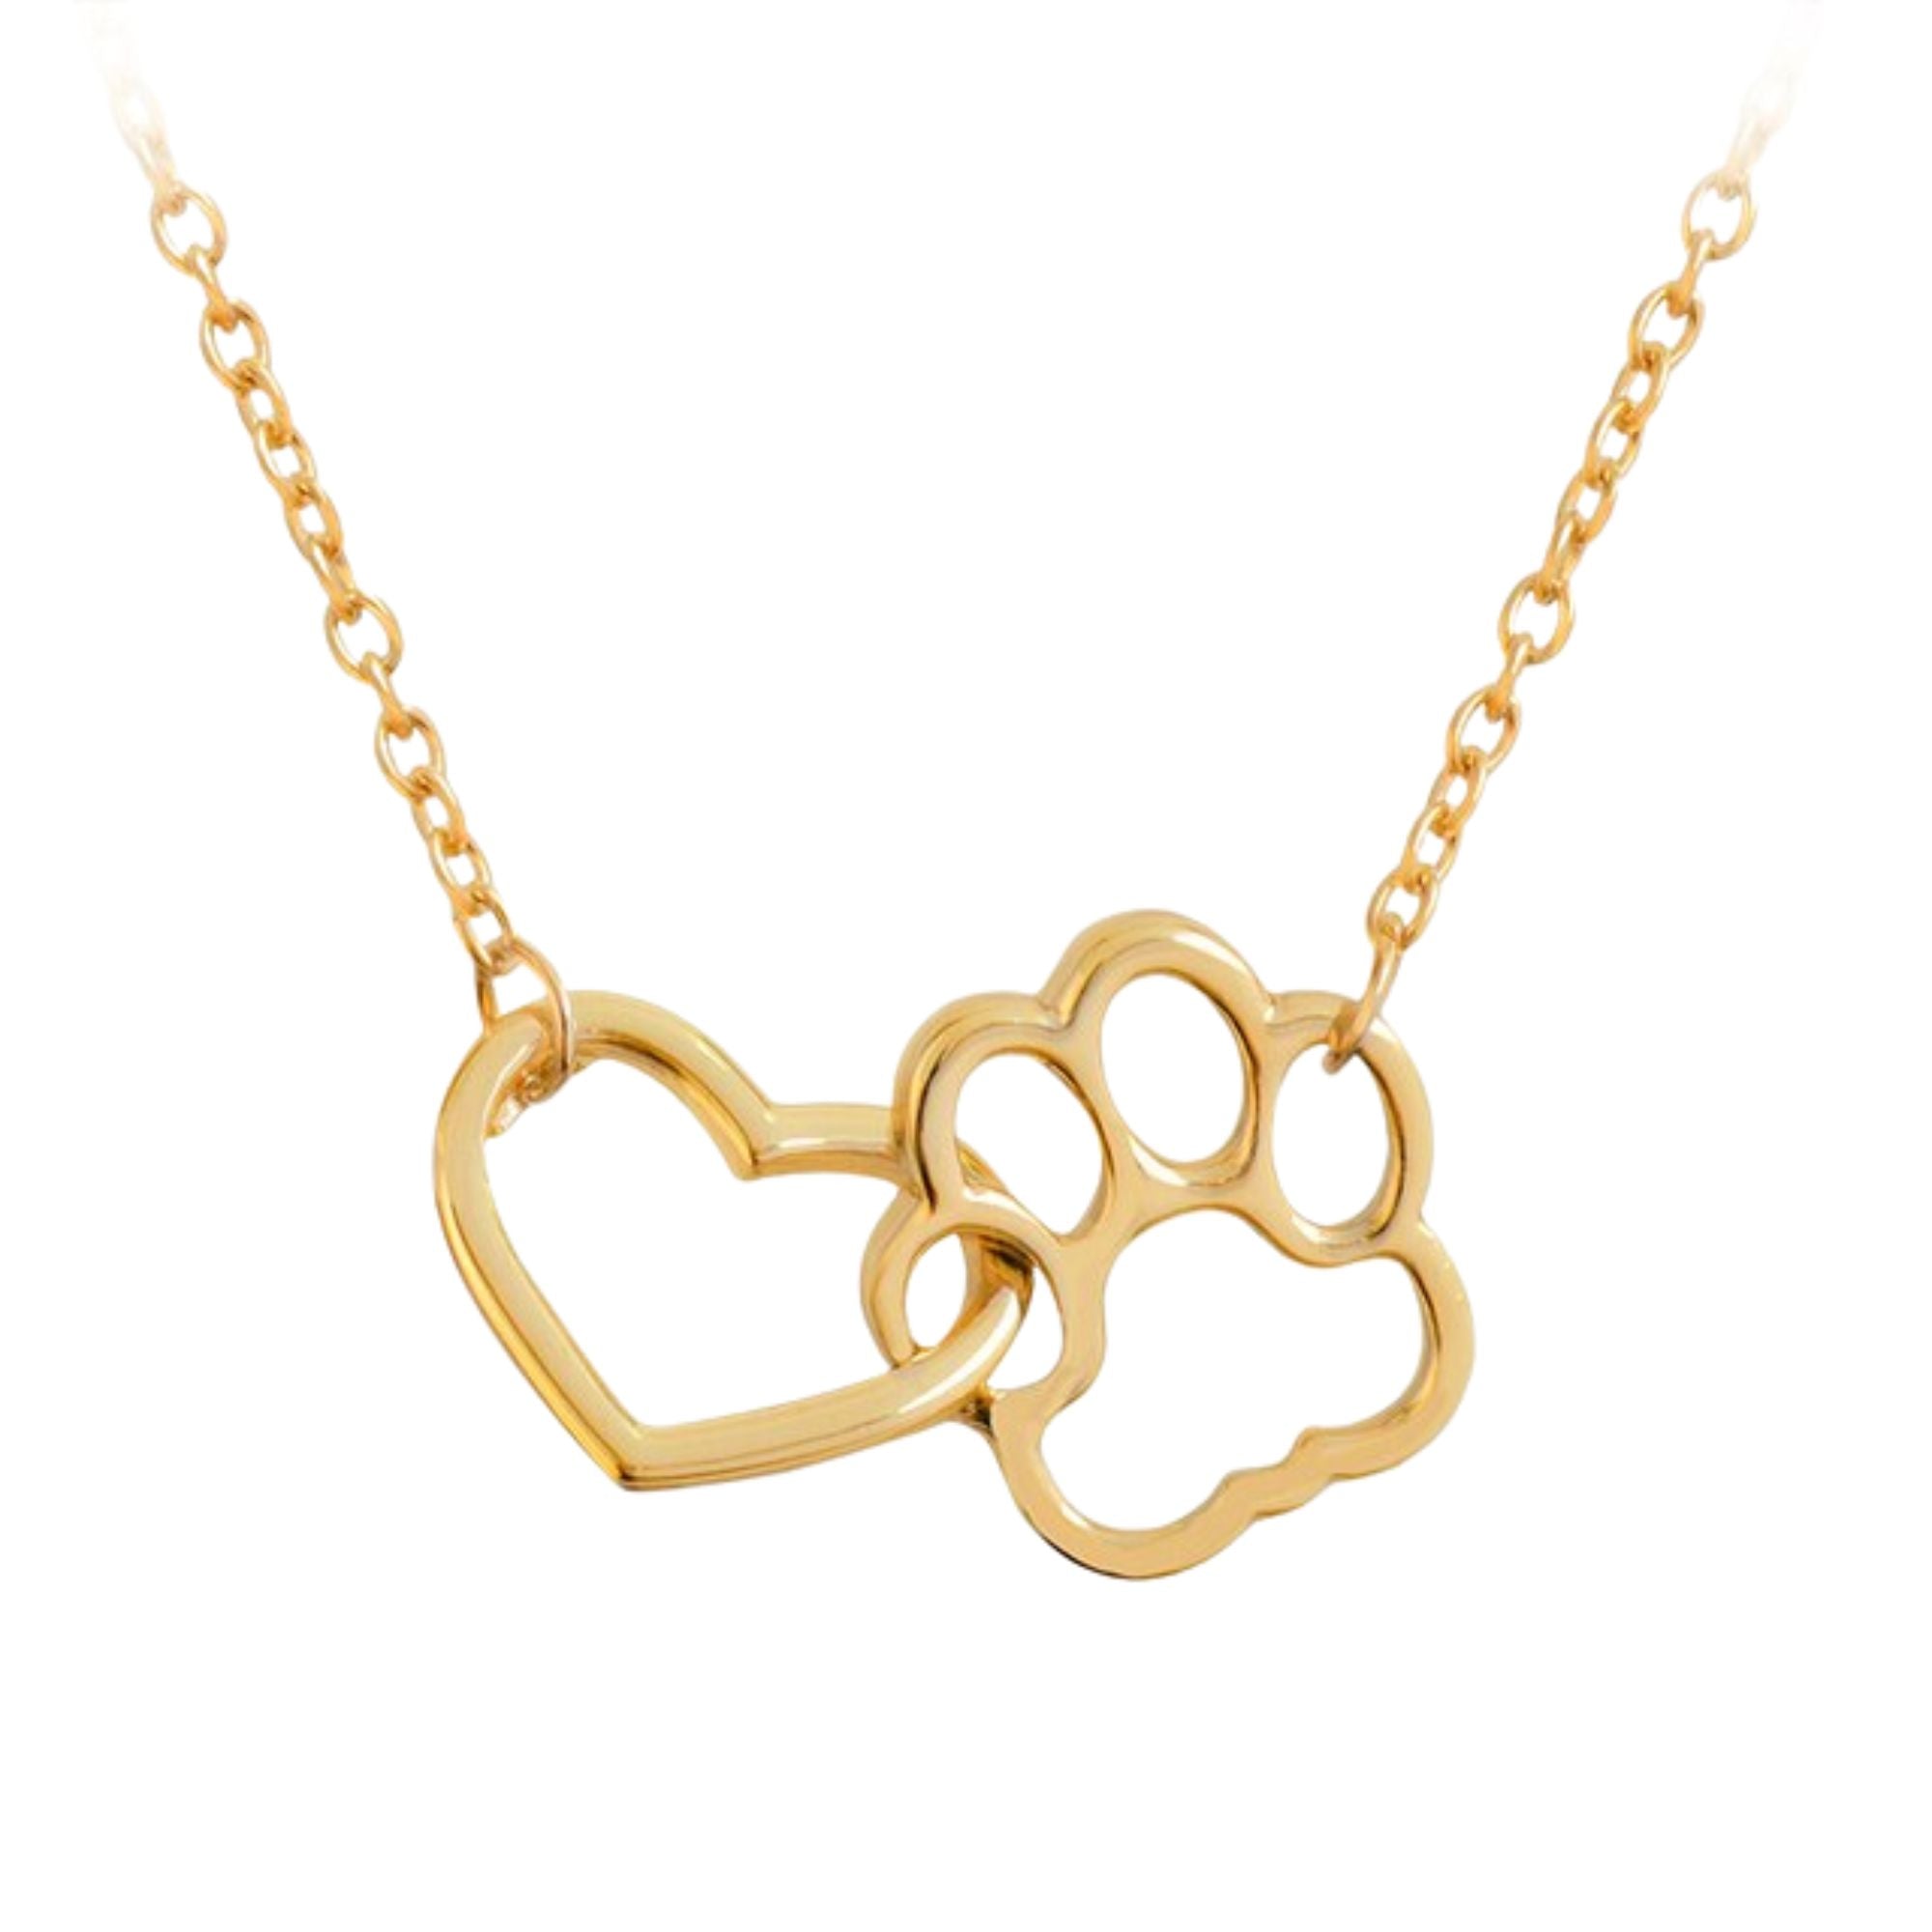 golden paw print shape attached to a  golden heart shape attached to a golden chain on either side